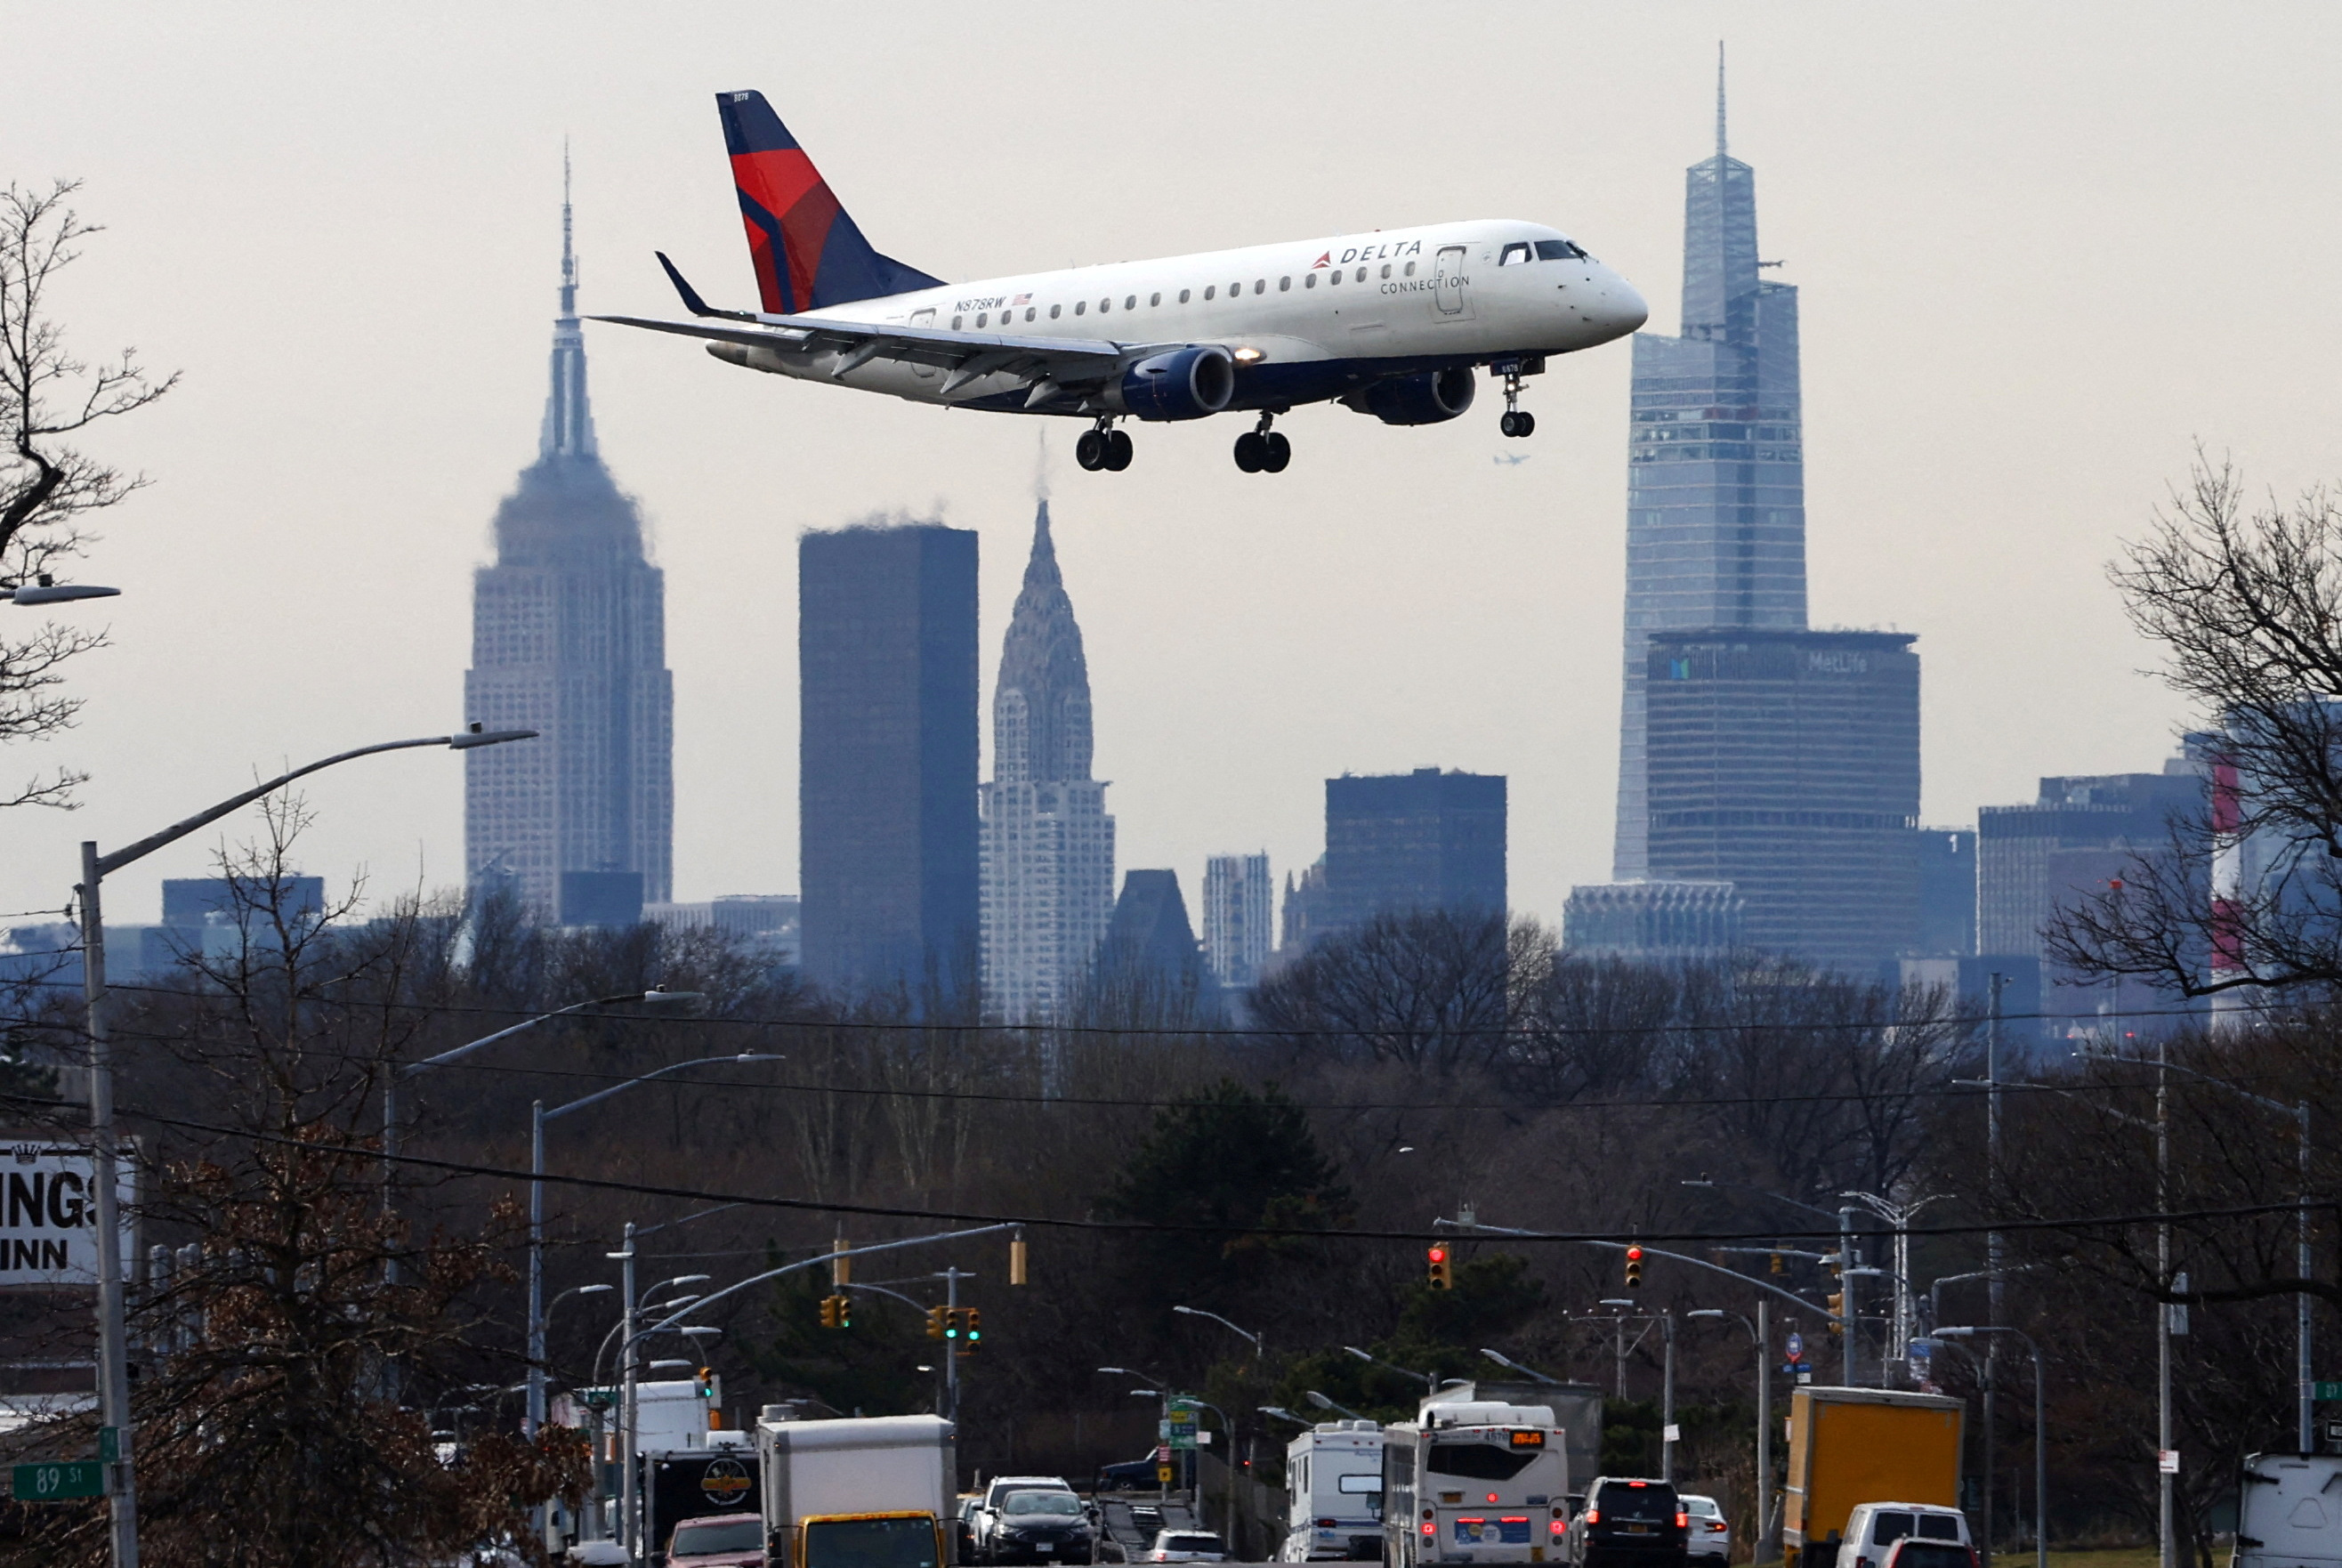 FILE PHOTO: A Delta Airlines jet comes in for a landing in front of the Empire State Building and Manhattan skyline at Laguardia Airport, in New York City, New York, U.S., January 11, 2023. REUTERS/Mike Segar/File Photo